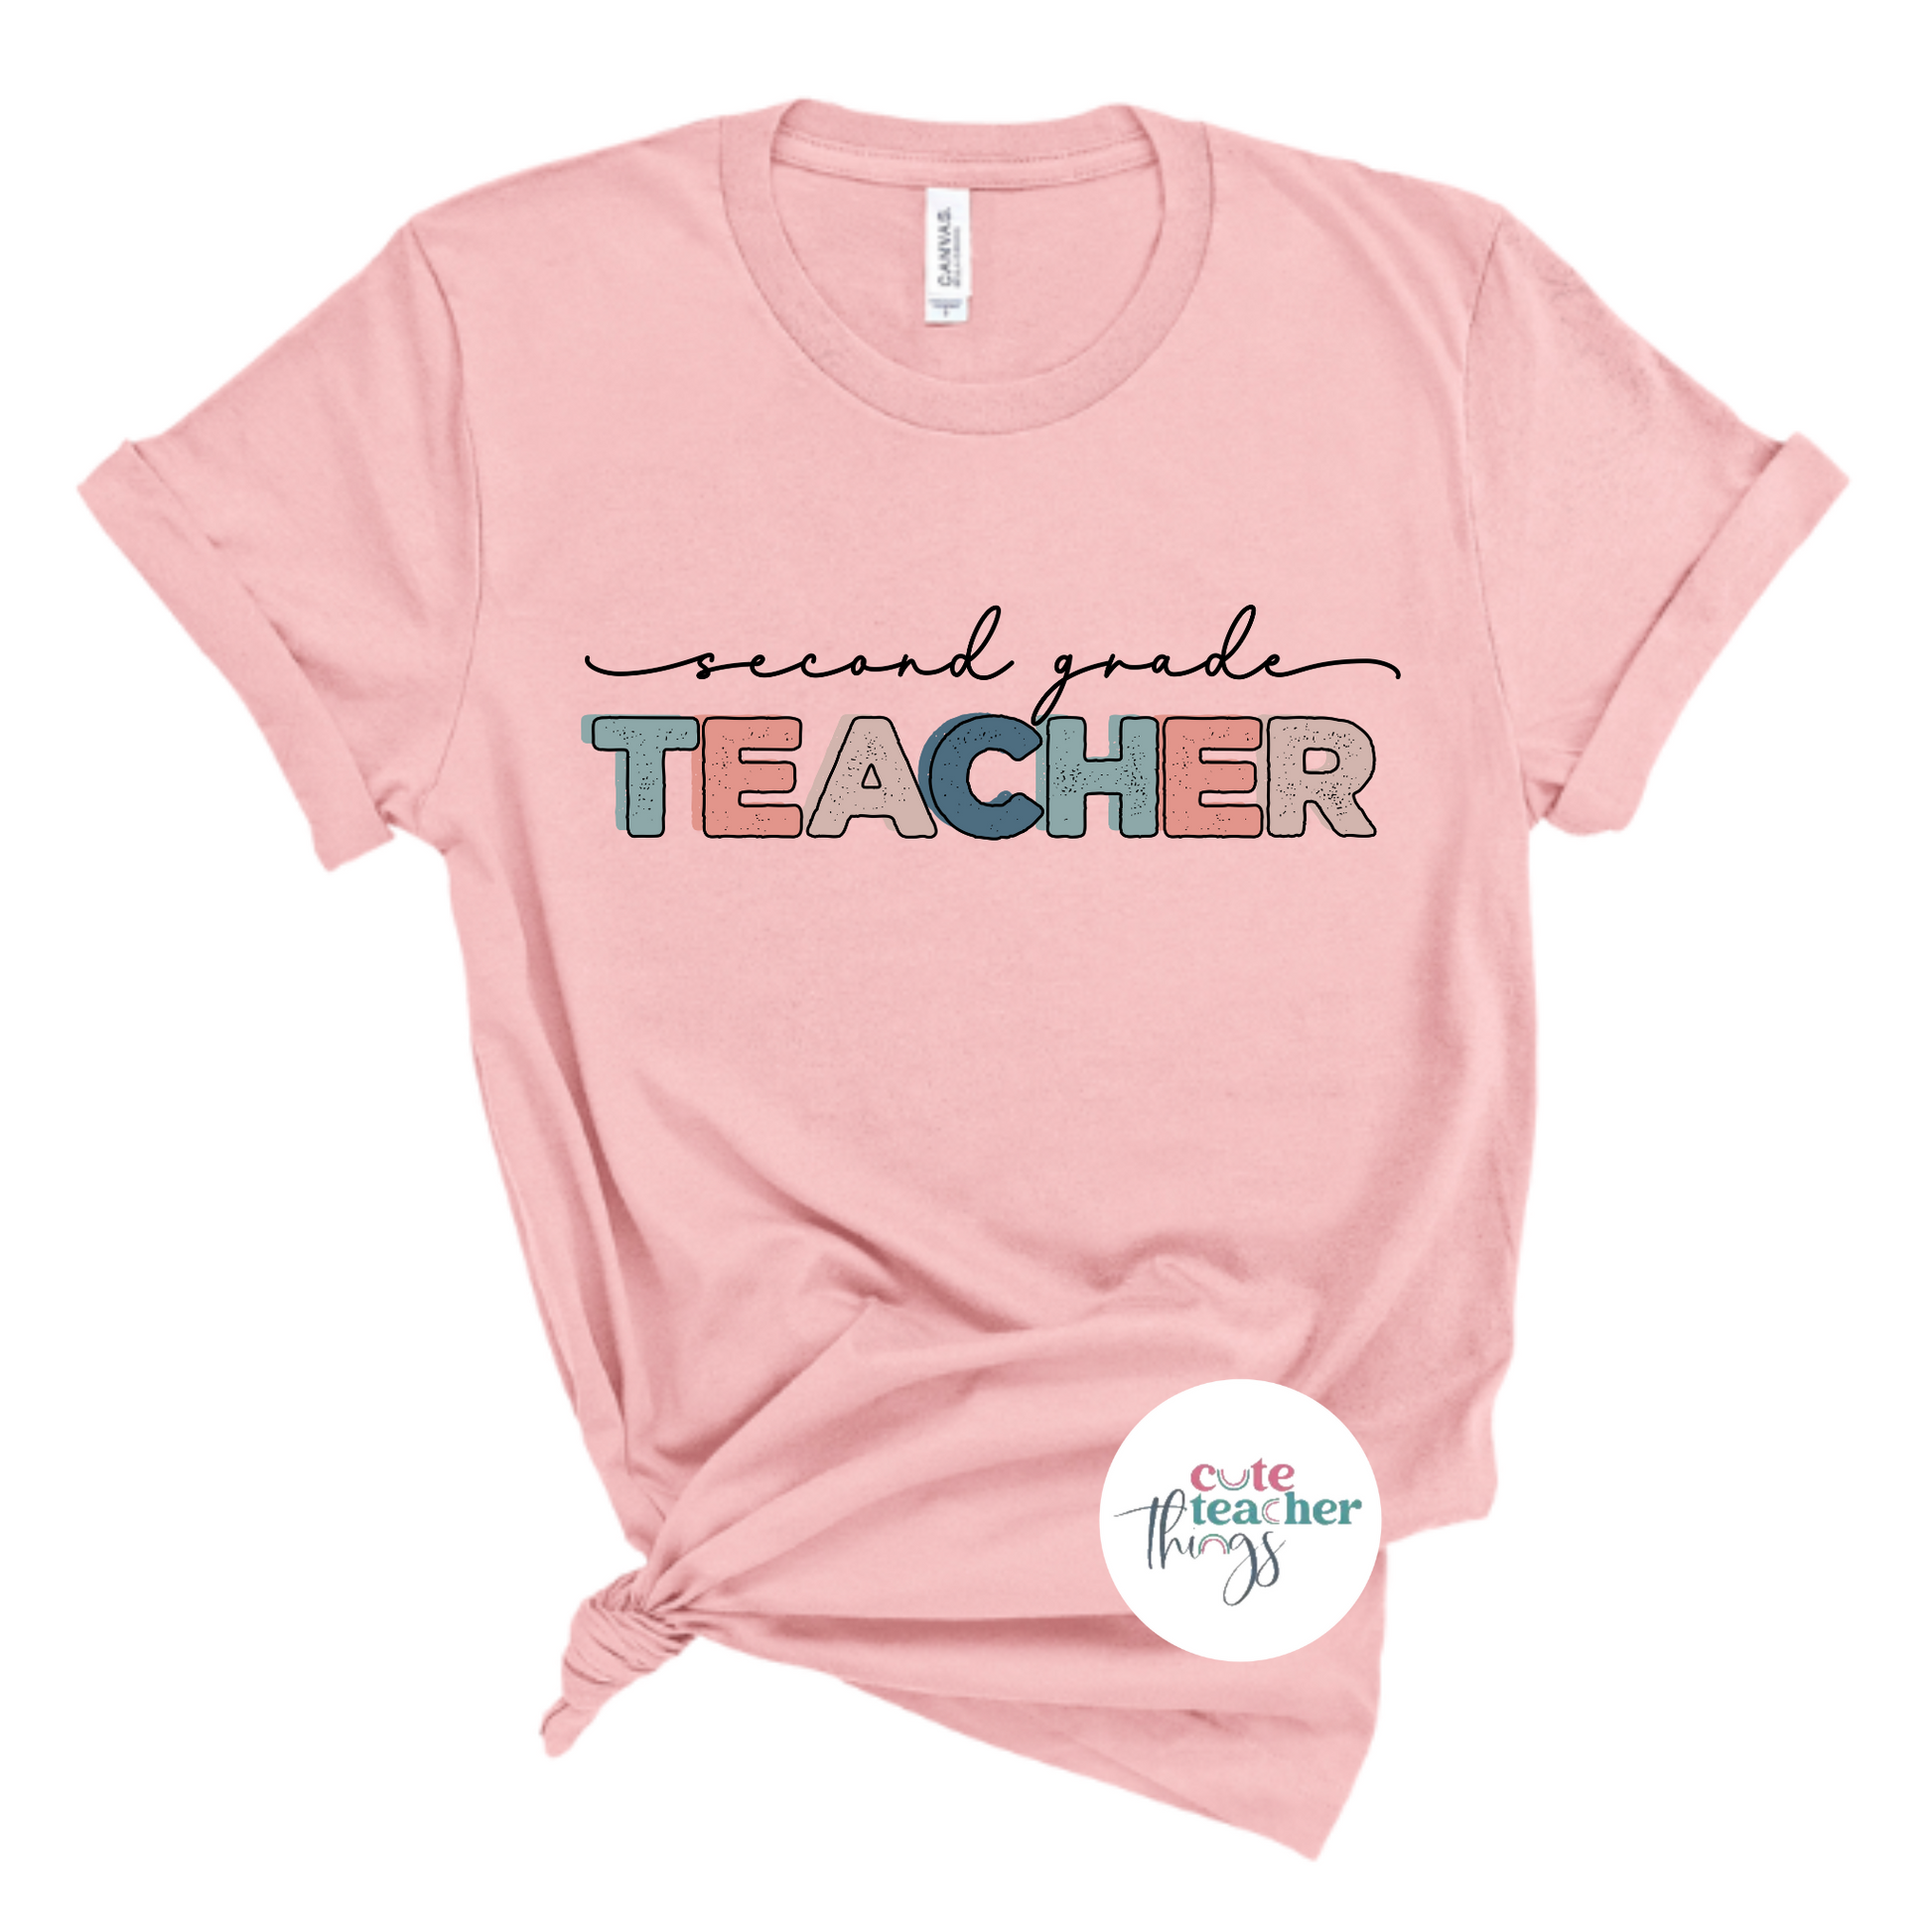 teachers day gift, back to school outfit, teacher clothing